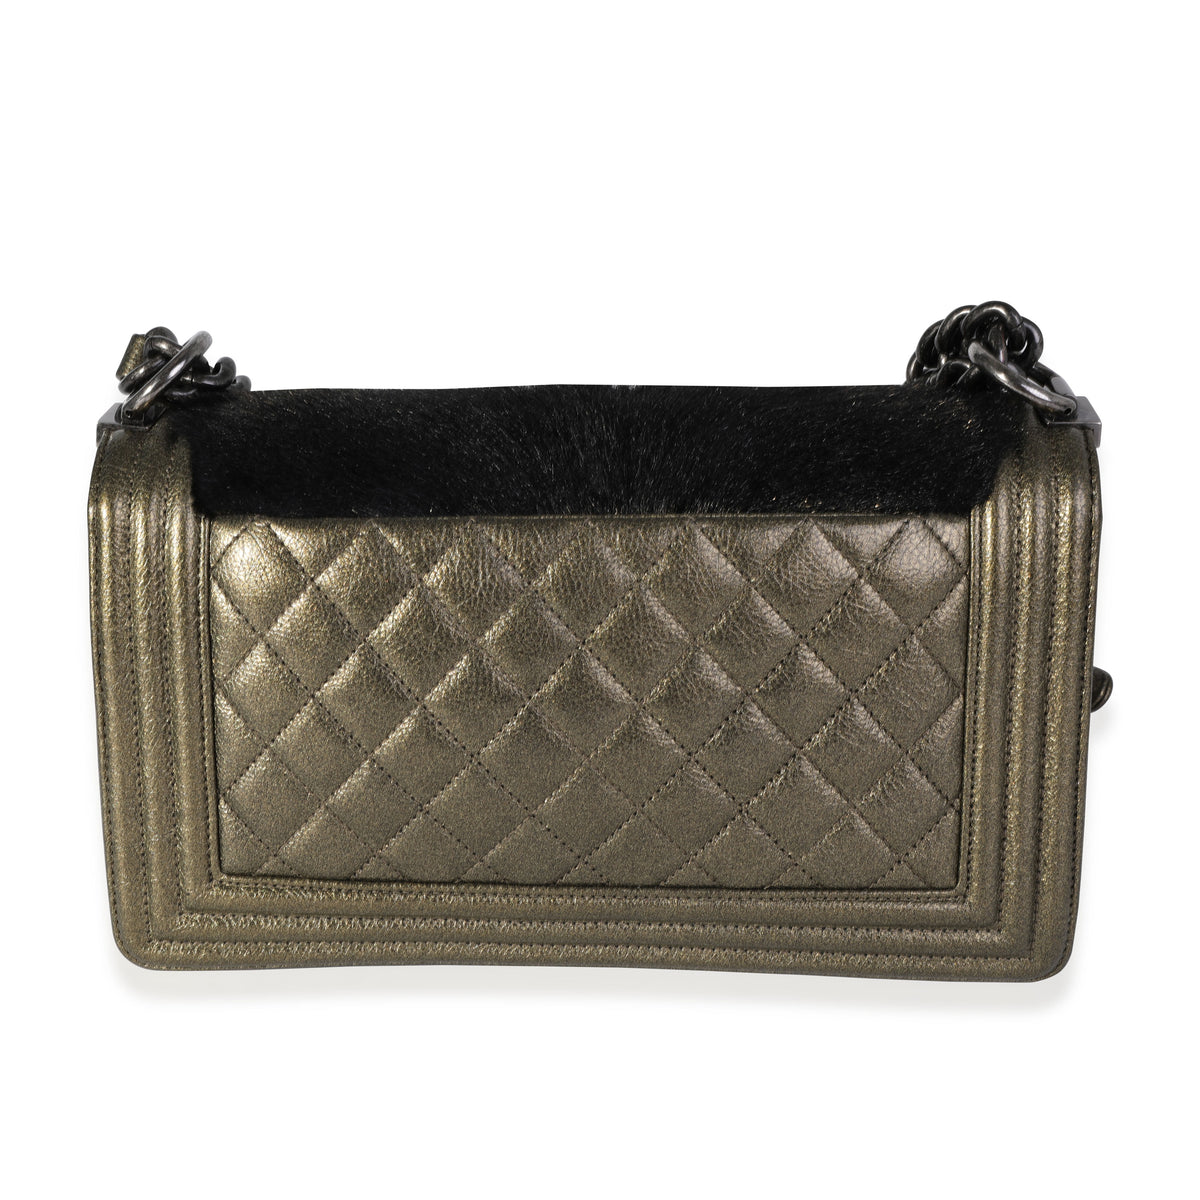 CHANEL Aged Metallic Calfskin Pearl CC Quilted Card Holder Gold